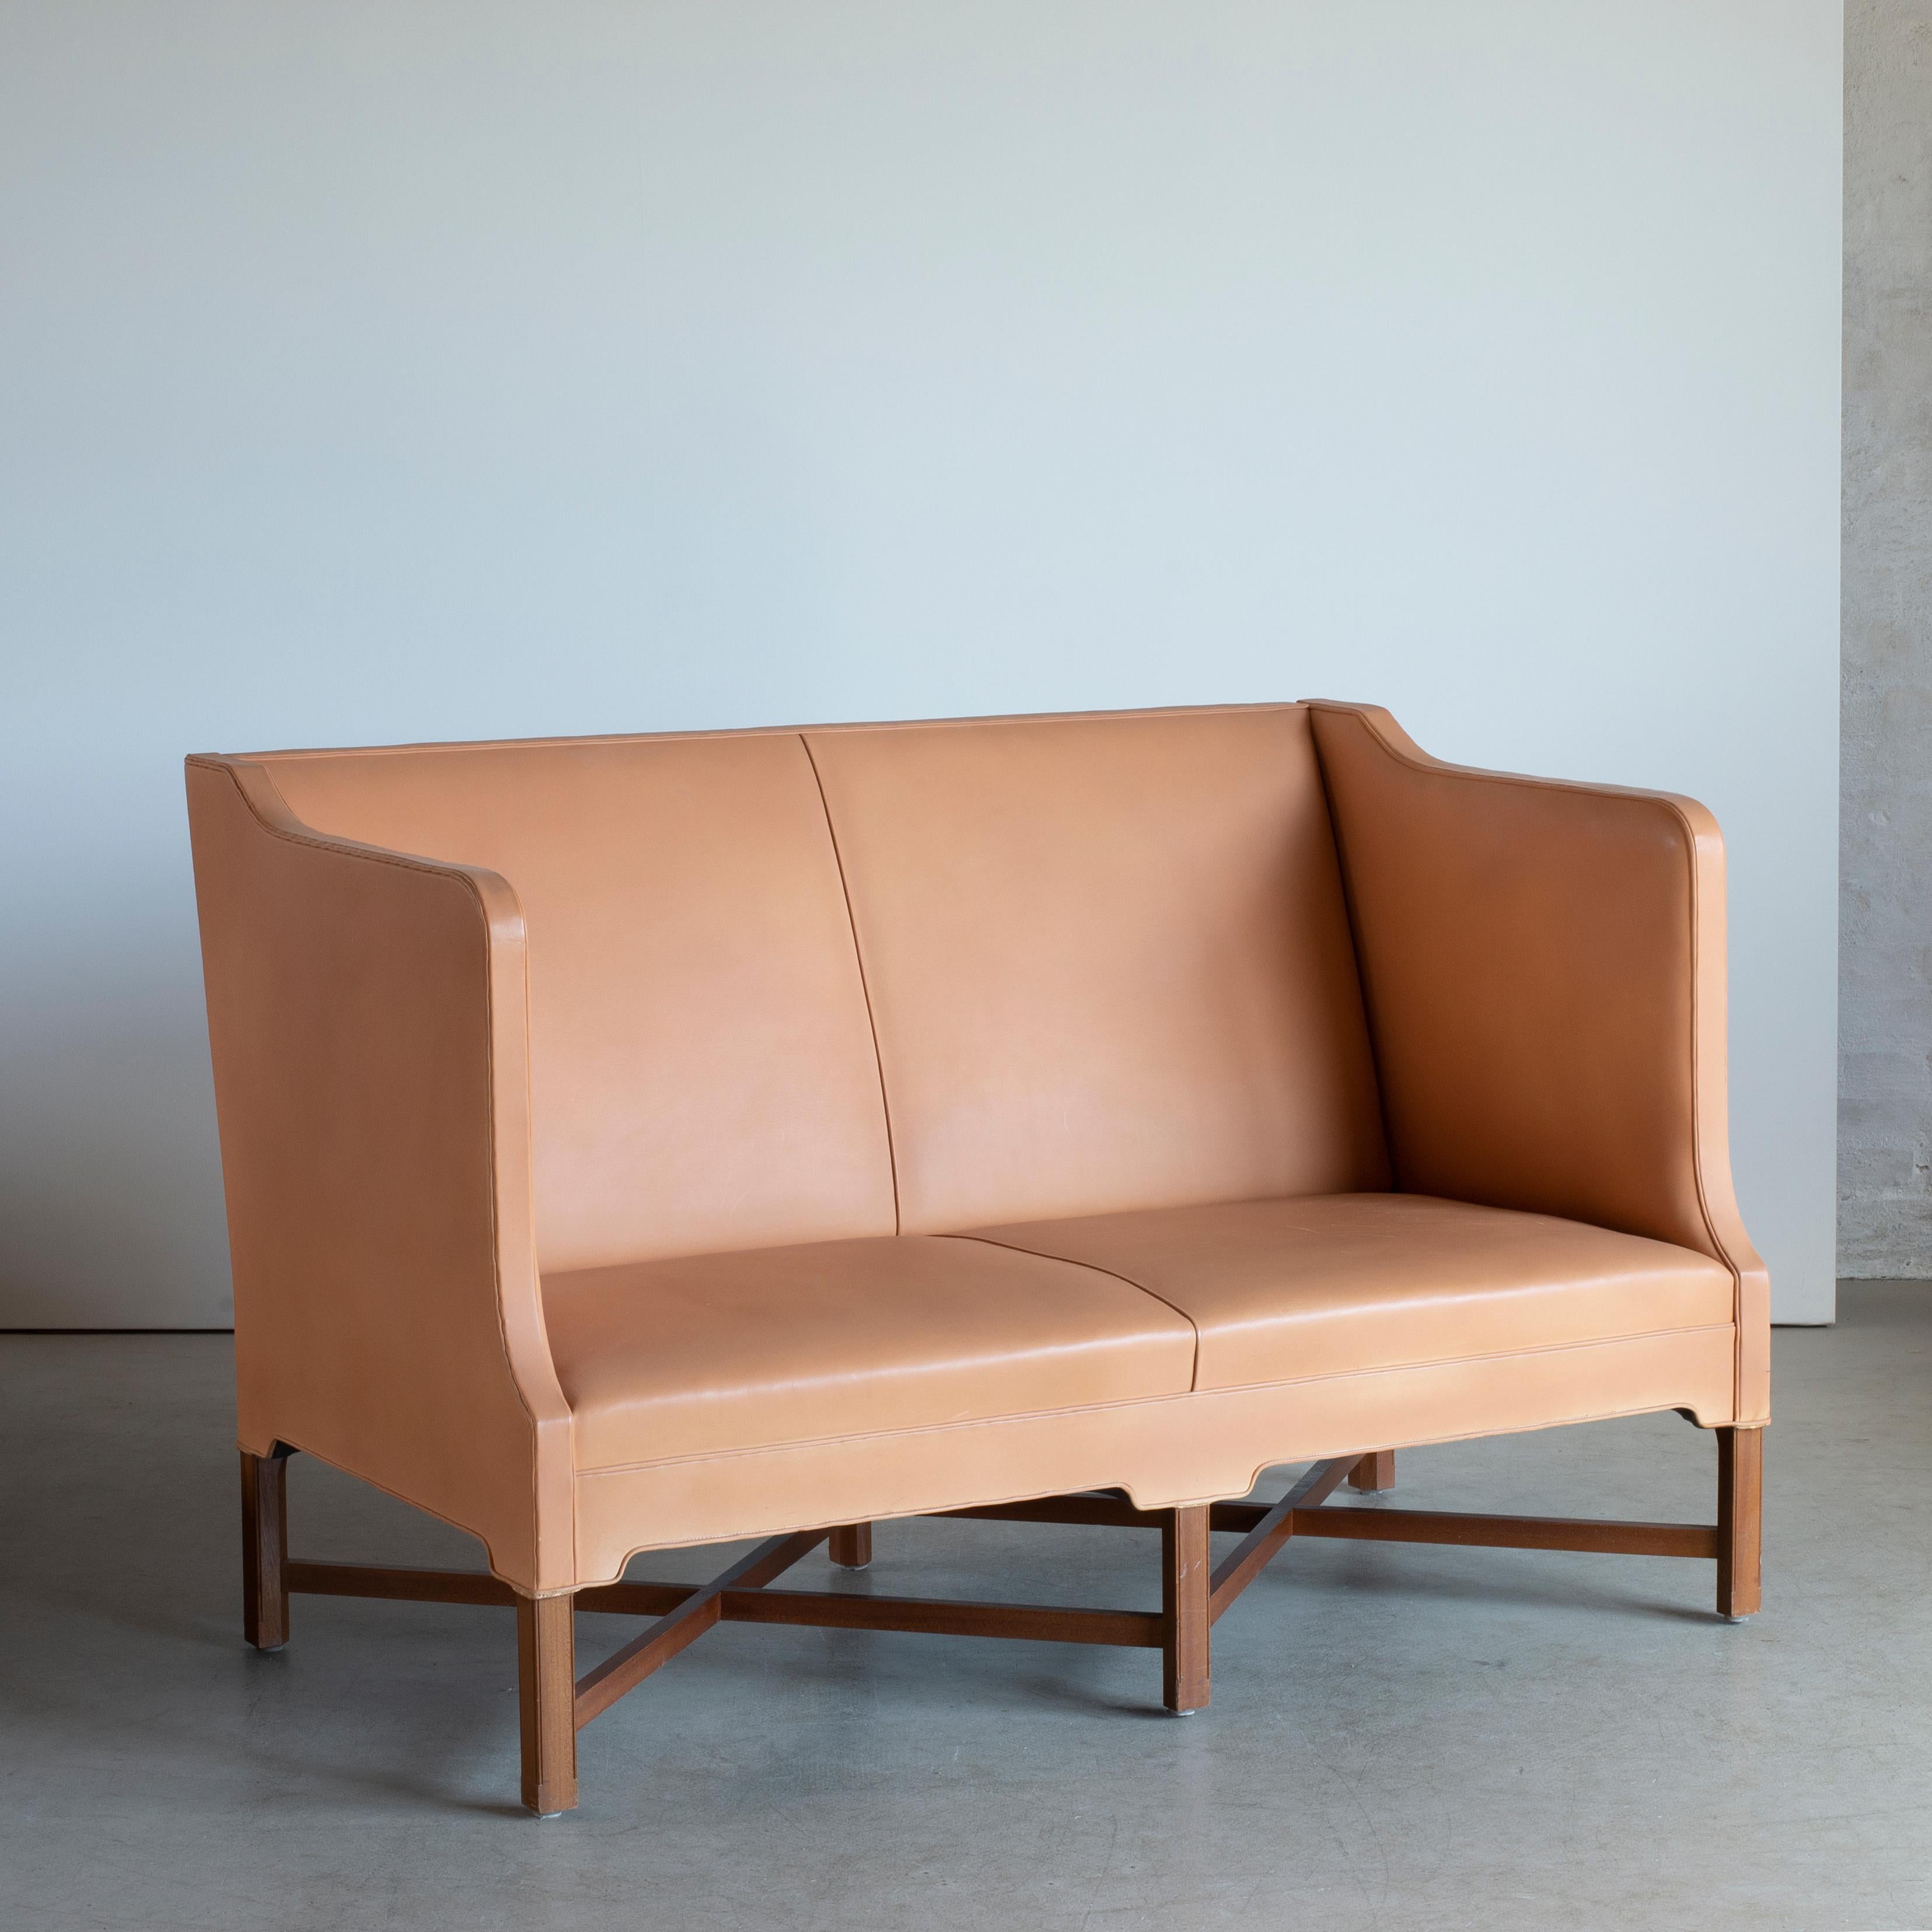 Kaare Klint freestanding two-seat sofa on six-legged, profiled mahogany cross-frame. Sides, seat and back upholstered with leather. Executed by Rud. Rasmussen, Copenhagen.